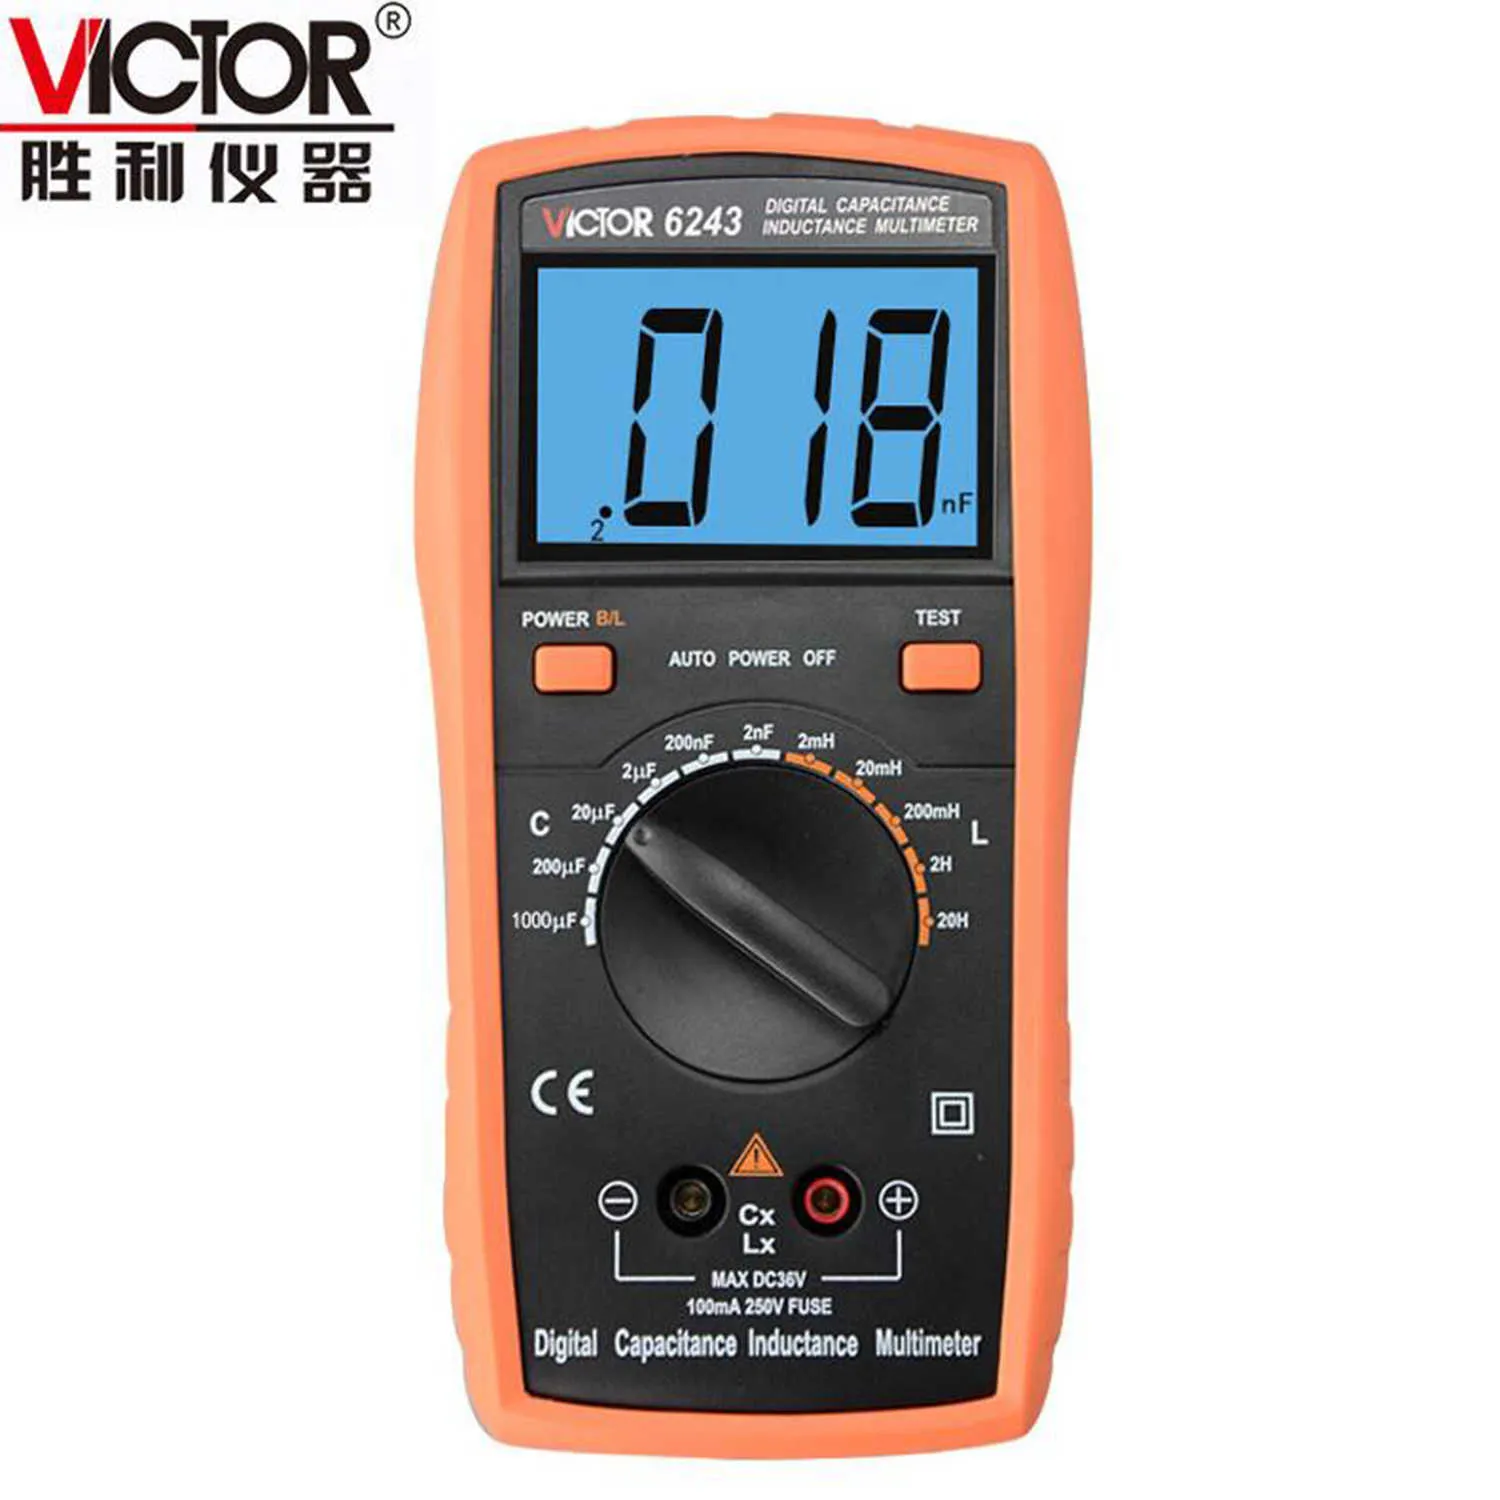 VICTOR VC6013 VC6243 Digital LCR Meter Capacitance Tester Diagnostic Tool Manual Range 2000 Counts Capacitor New.